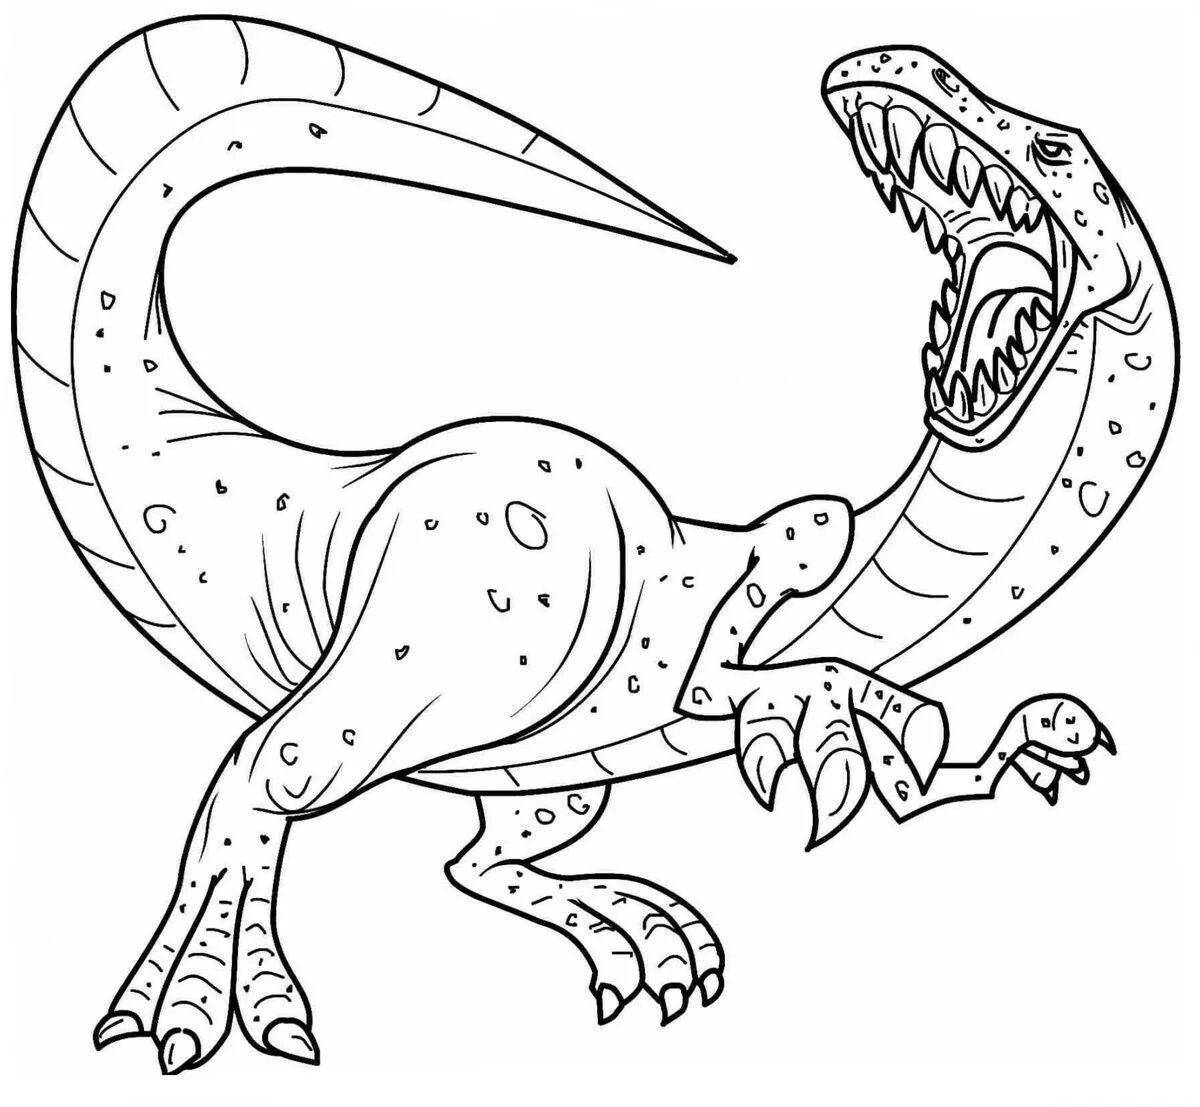 Funny dinosaur coloring pages for kids 6-7 years old